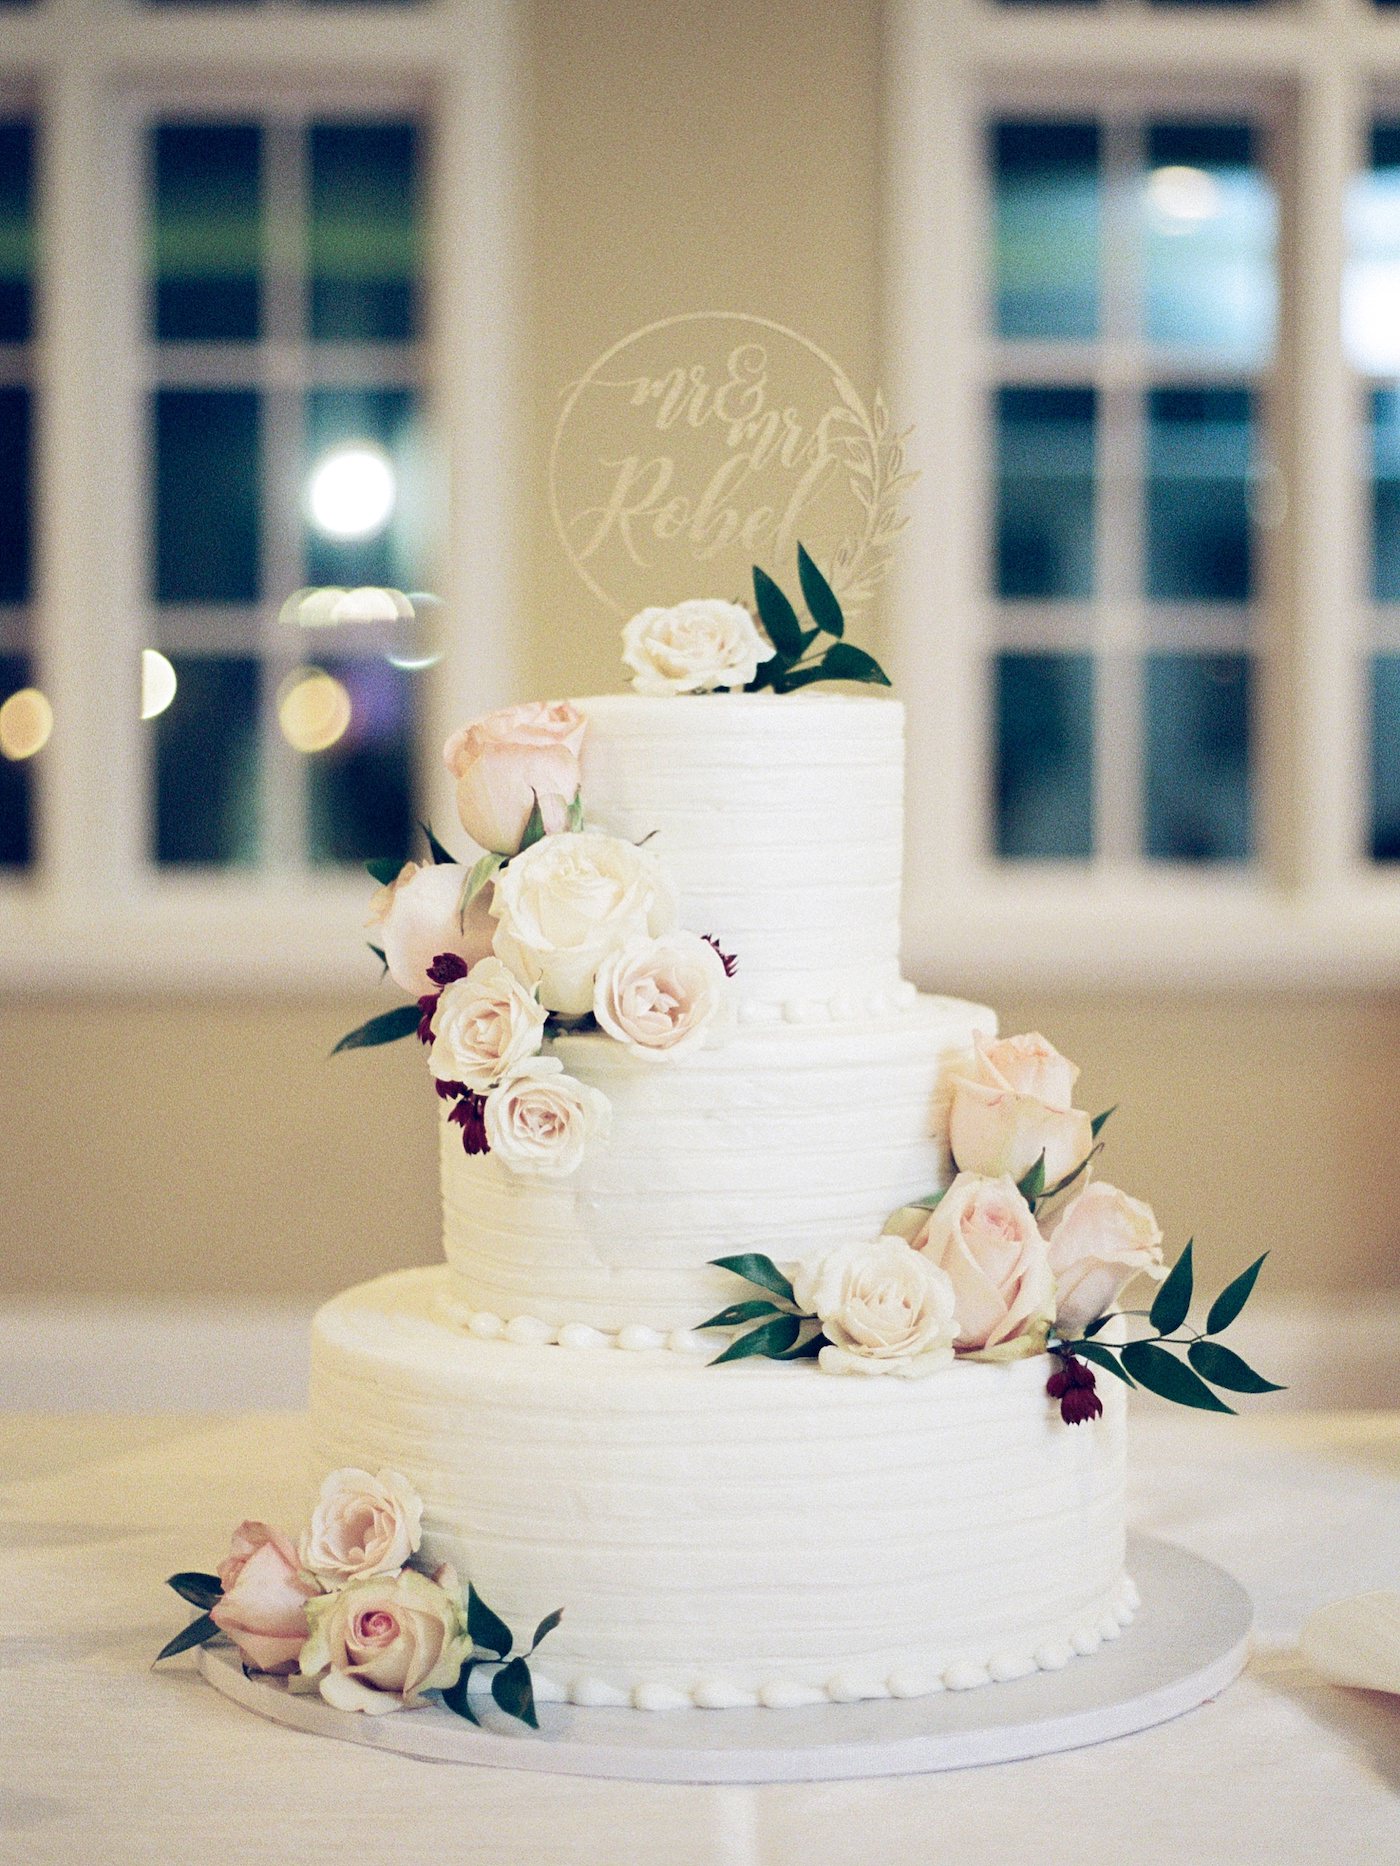 Three Tier Buttercream Wedding Cake with Fresh Flowers and Greenery Accents of Cream Roses and Gold Die Cut Cake Topper